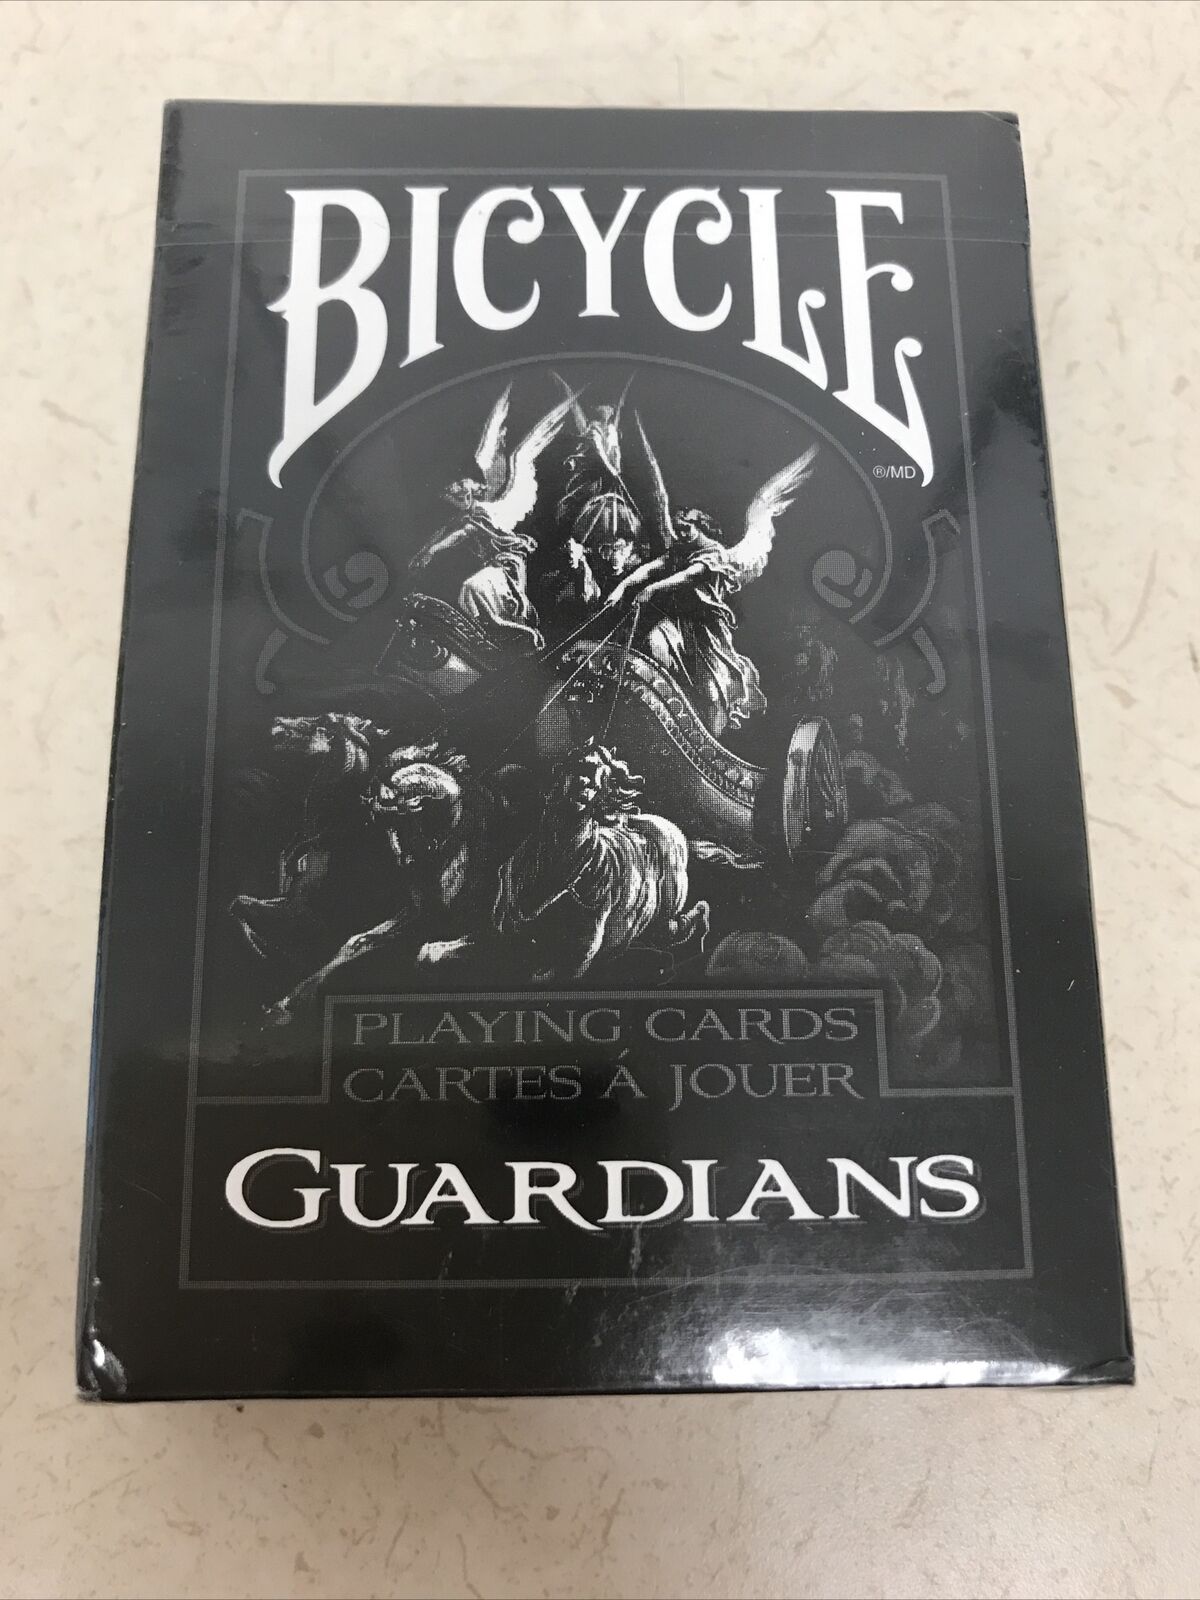 New Playing Cards Bicycle Guardians Guardian Angel Game 52 Rare